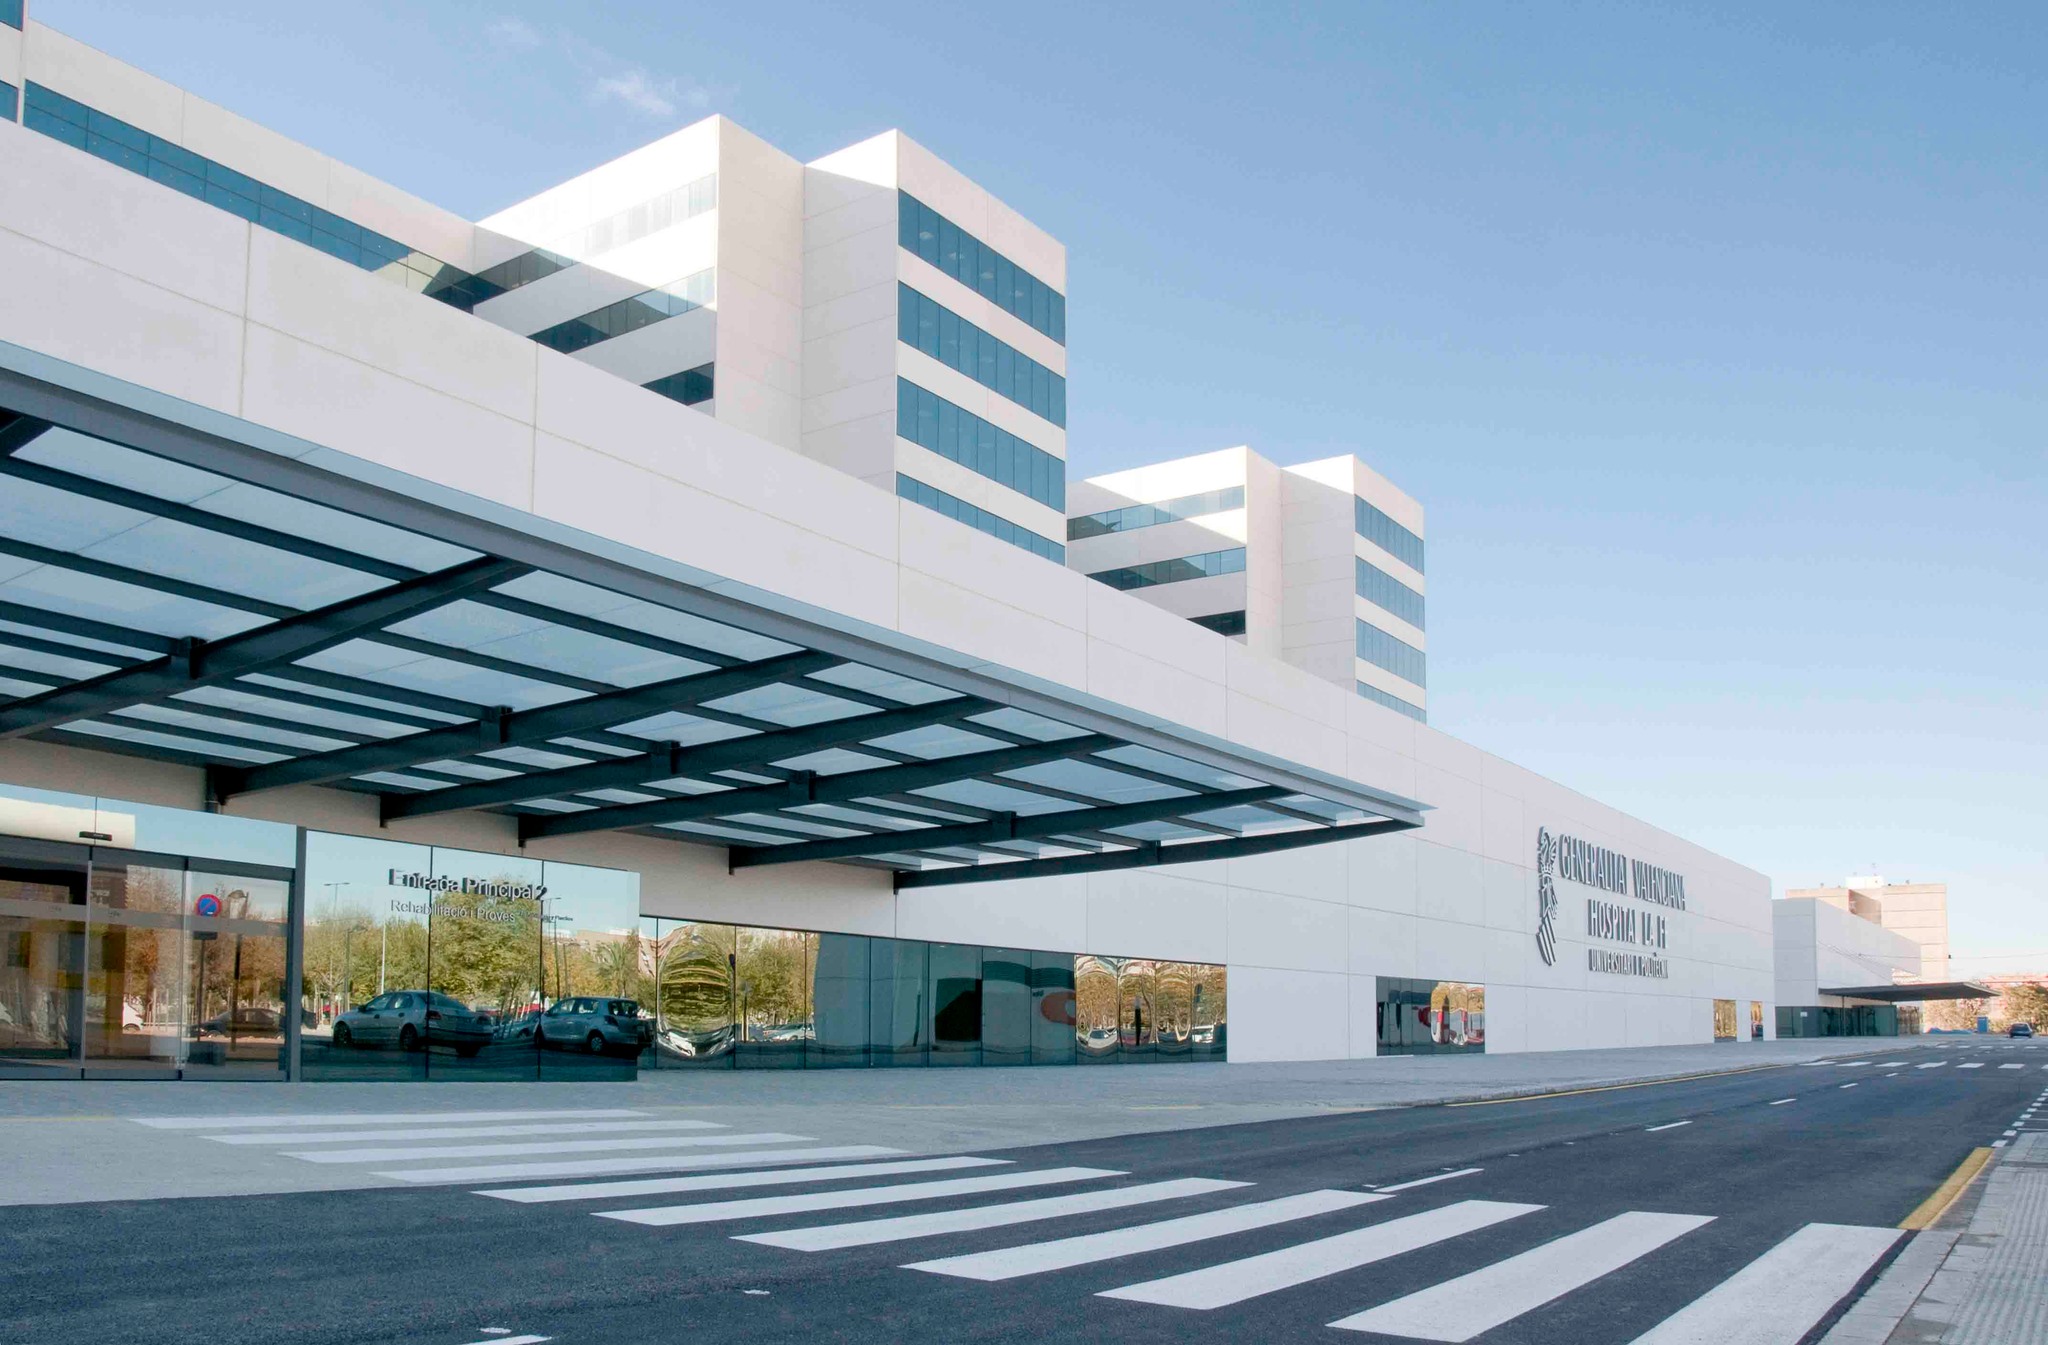 Best emergency department in Spain award goes to Valencia hospital